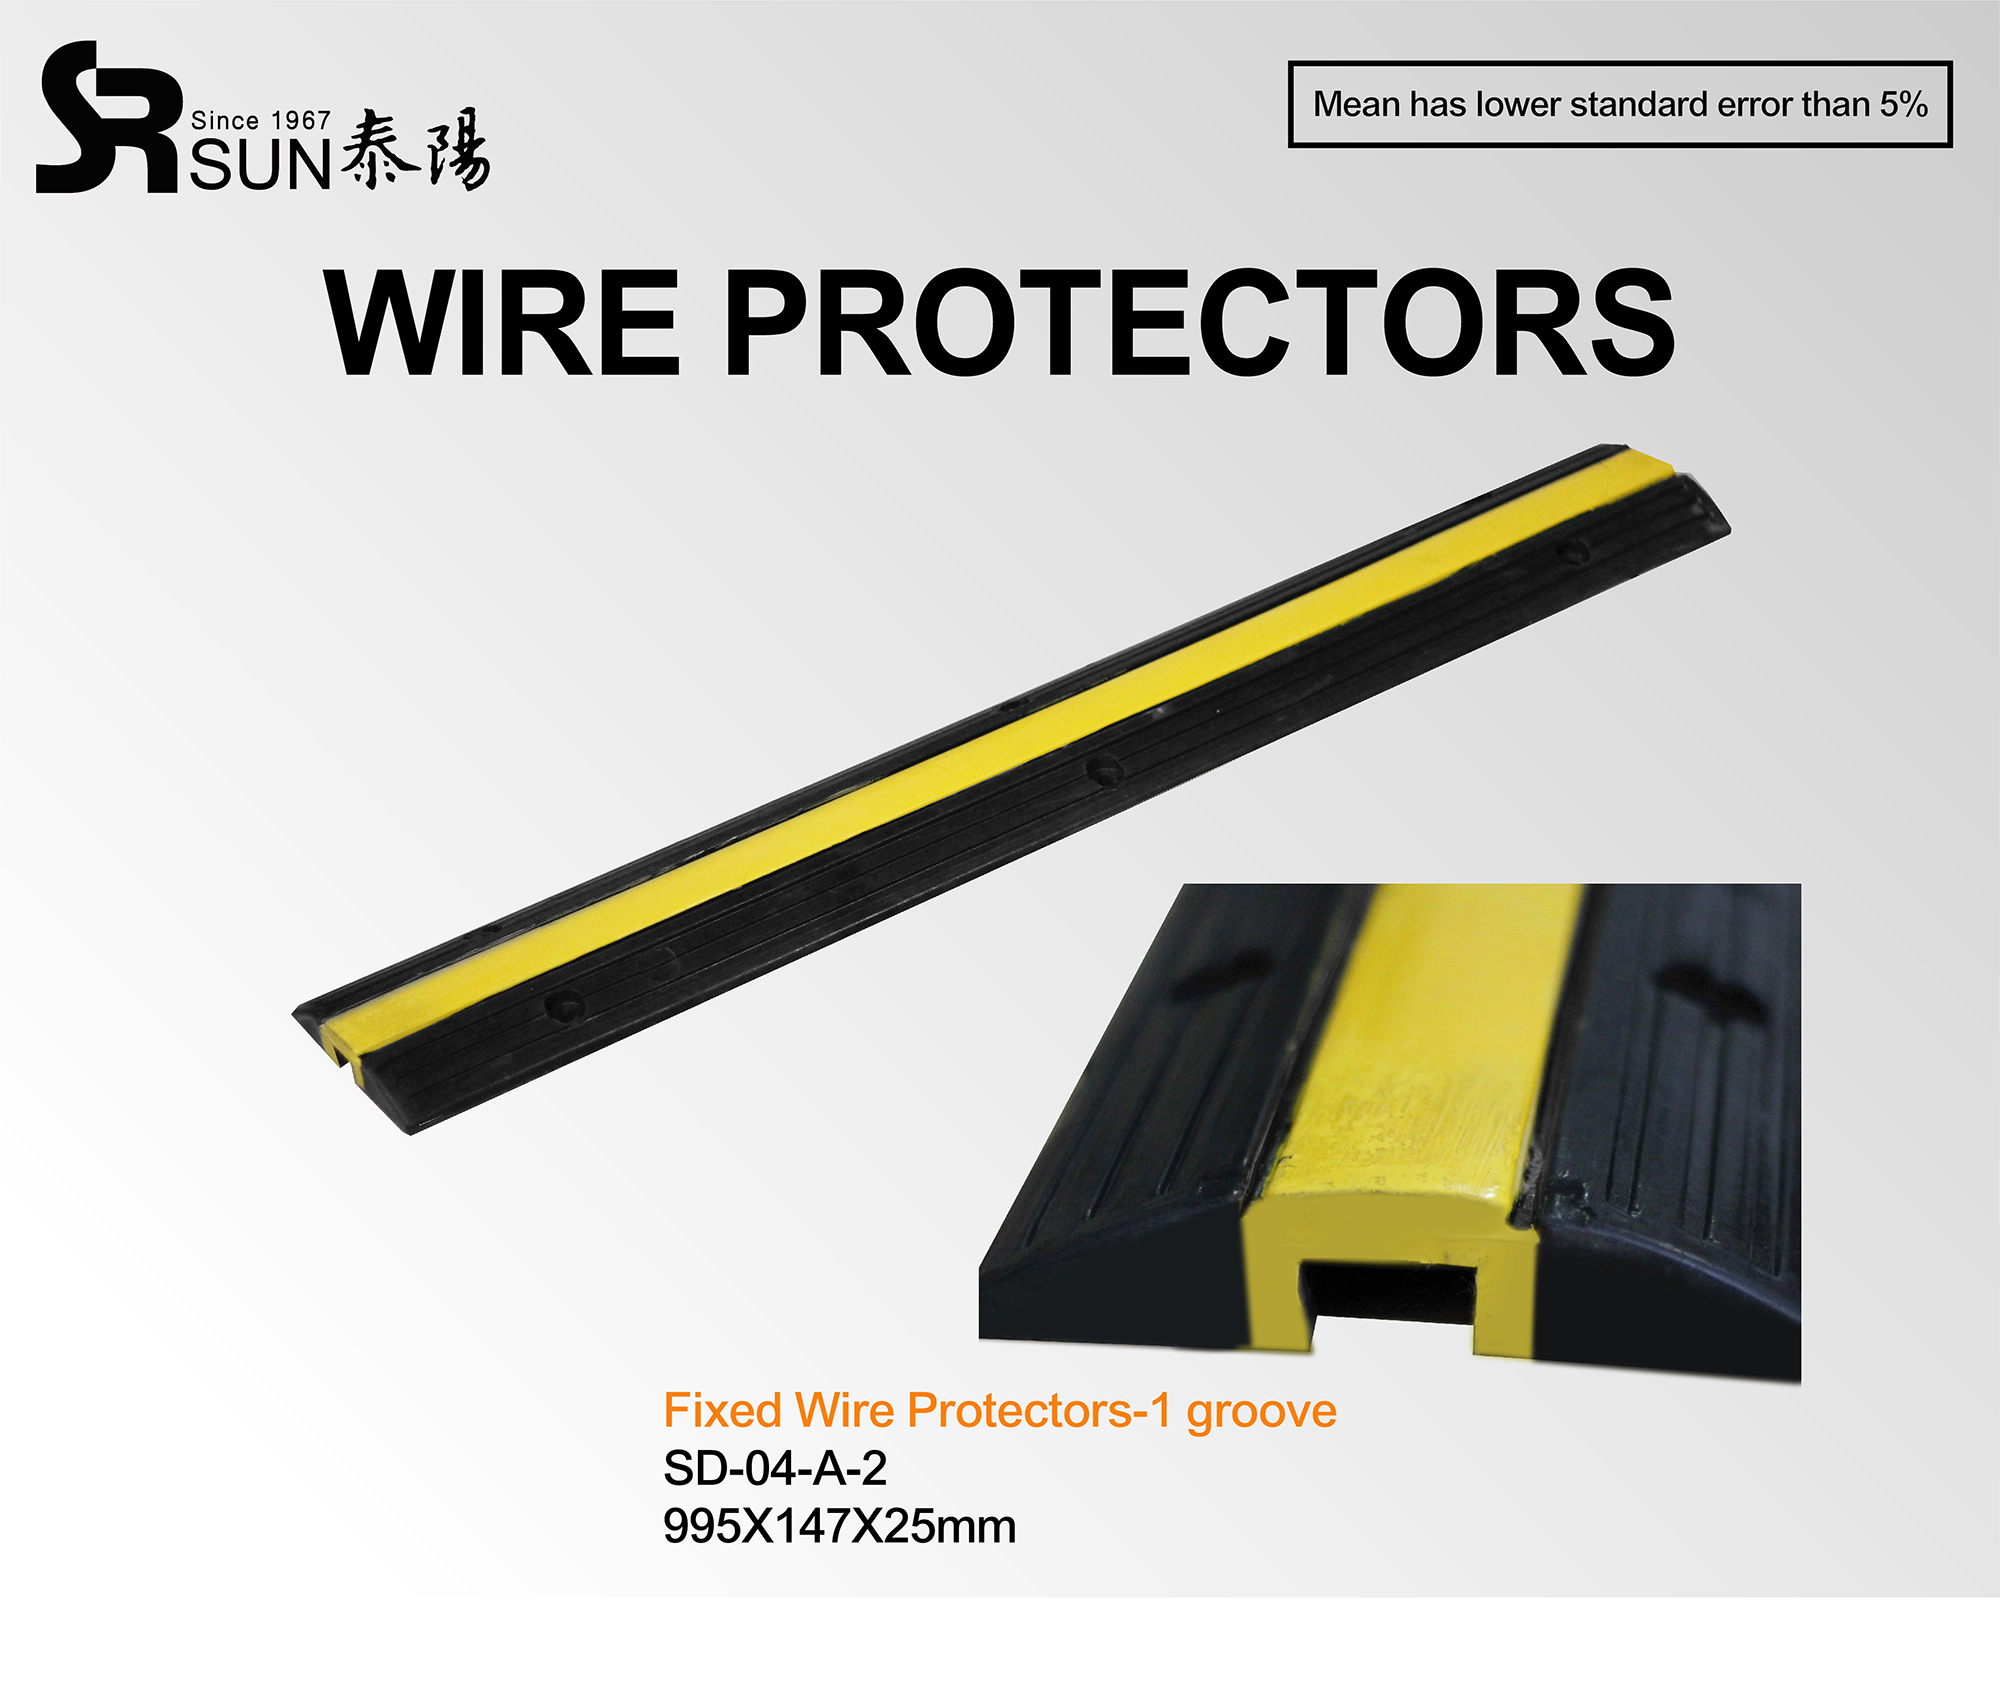 Fixed Wire Protectors-1 groove(SD-04-A-2)